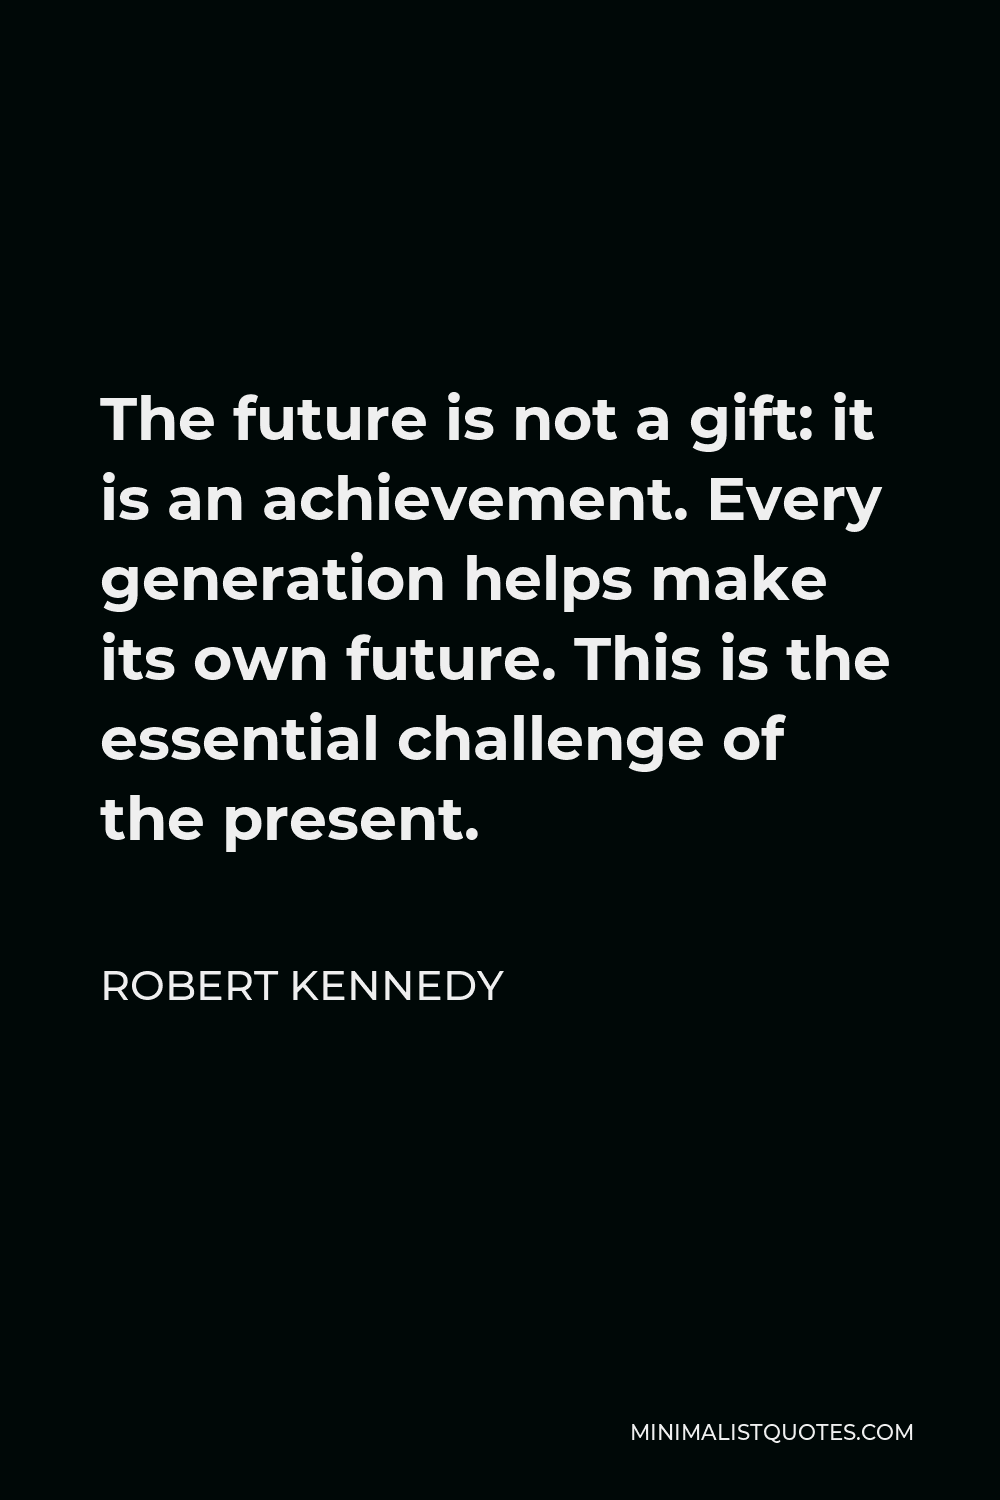 Robert Kennedy Quote - The future is not a gift: it is an achievement. Every generation helps make its own future. This is the essential challenge of the present.